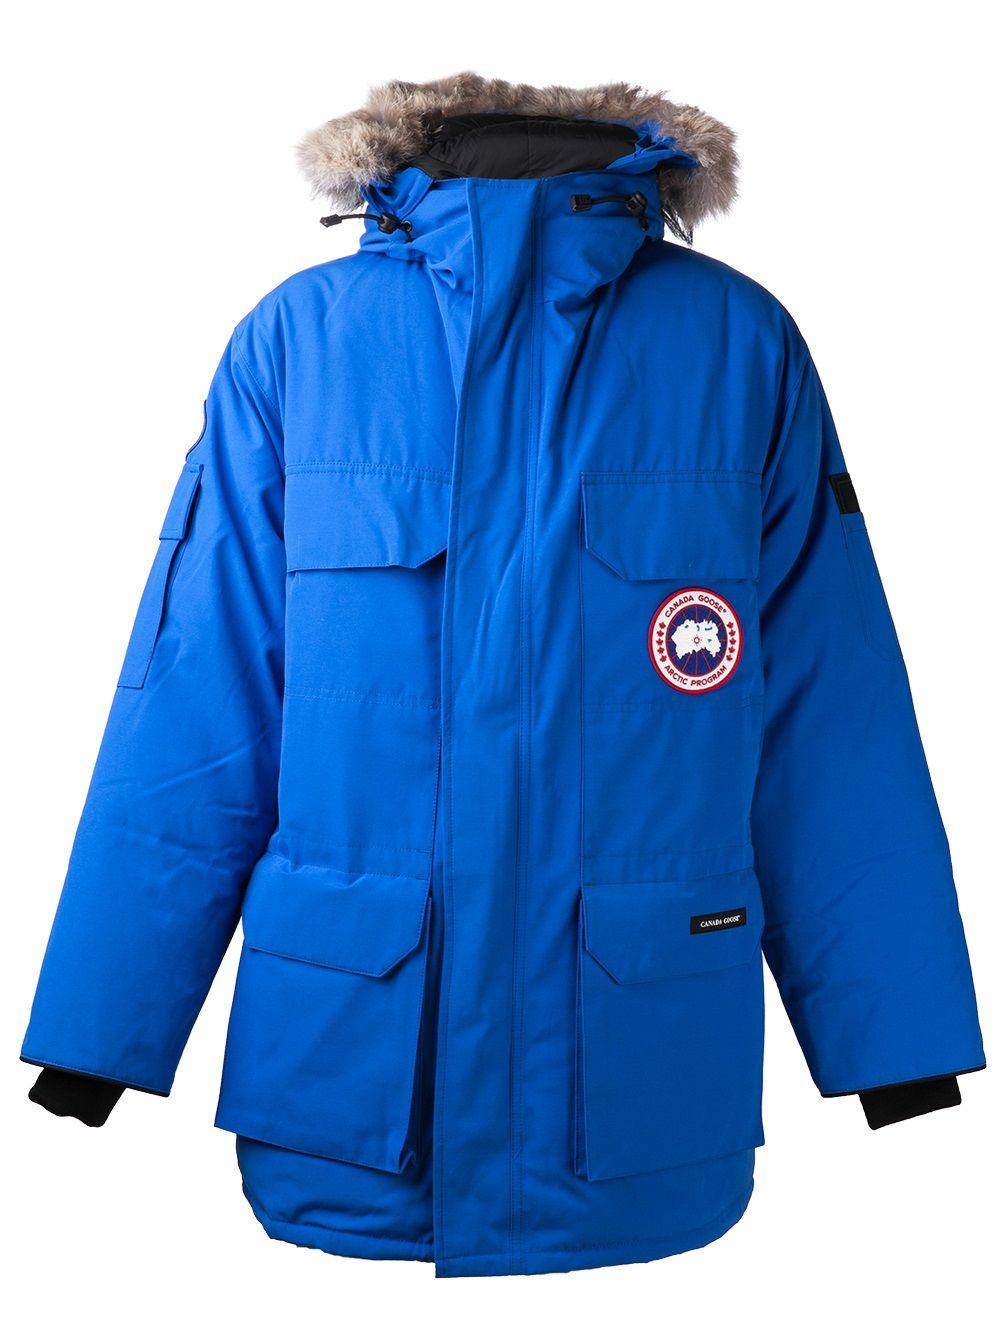 Canada Goose Expedition Parka in Blue for Men - Lyst